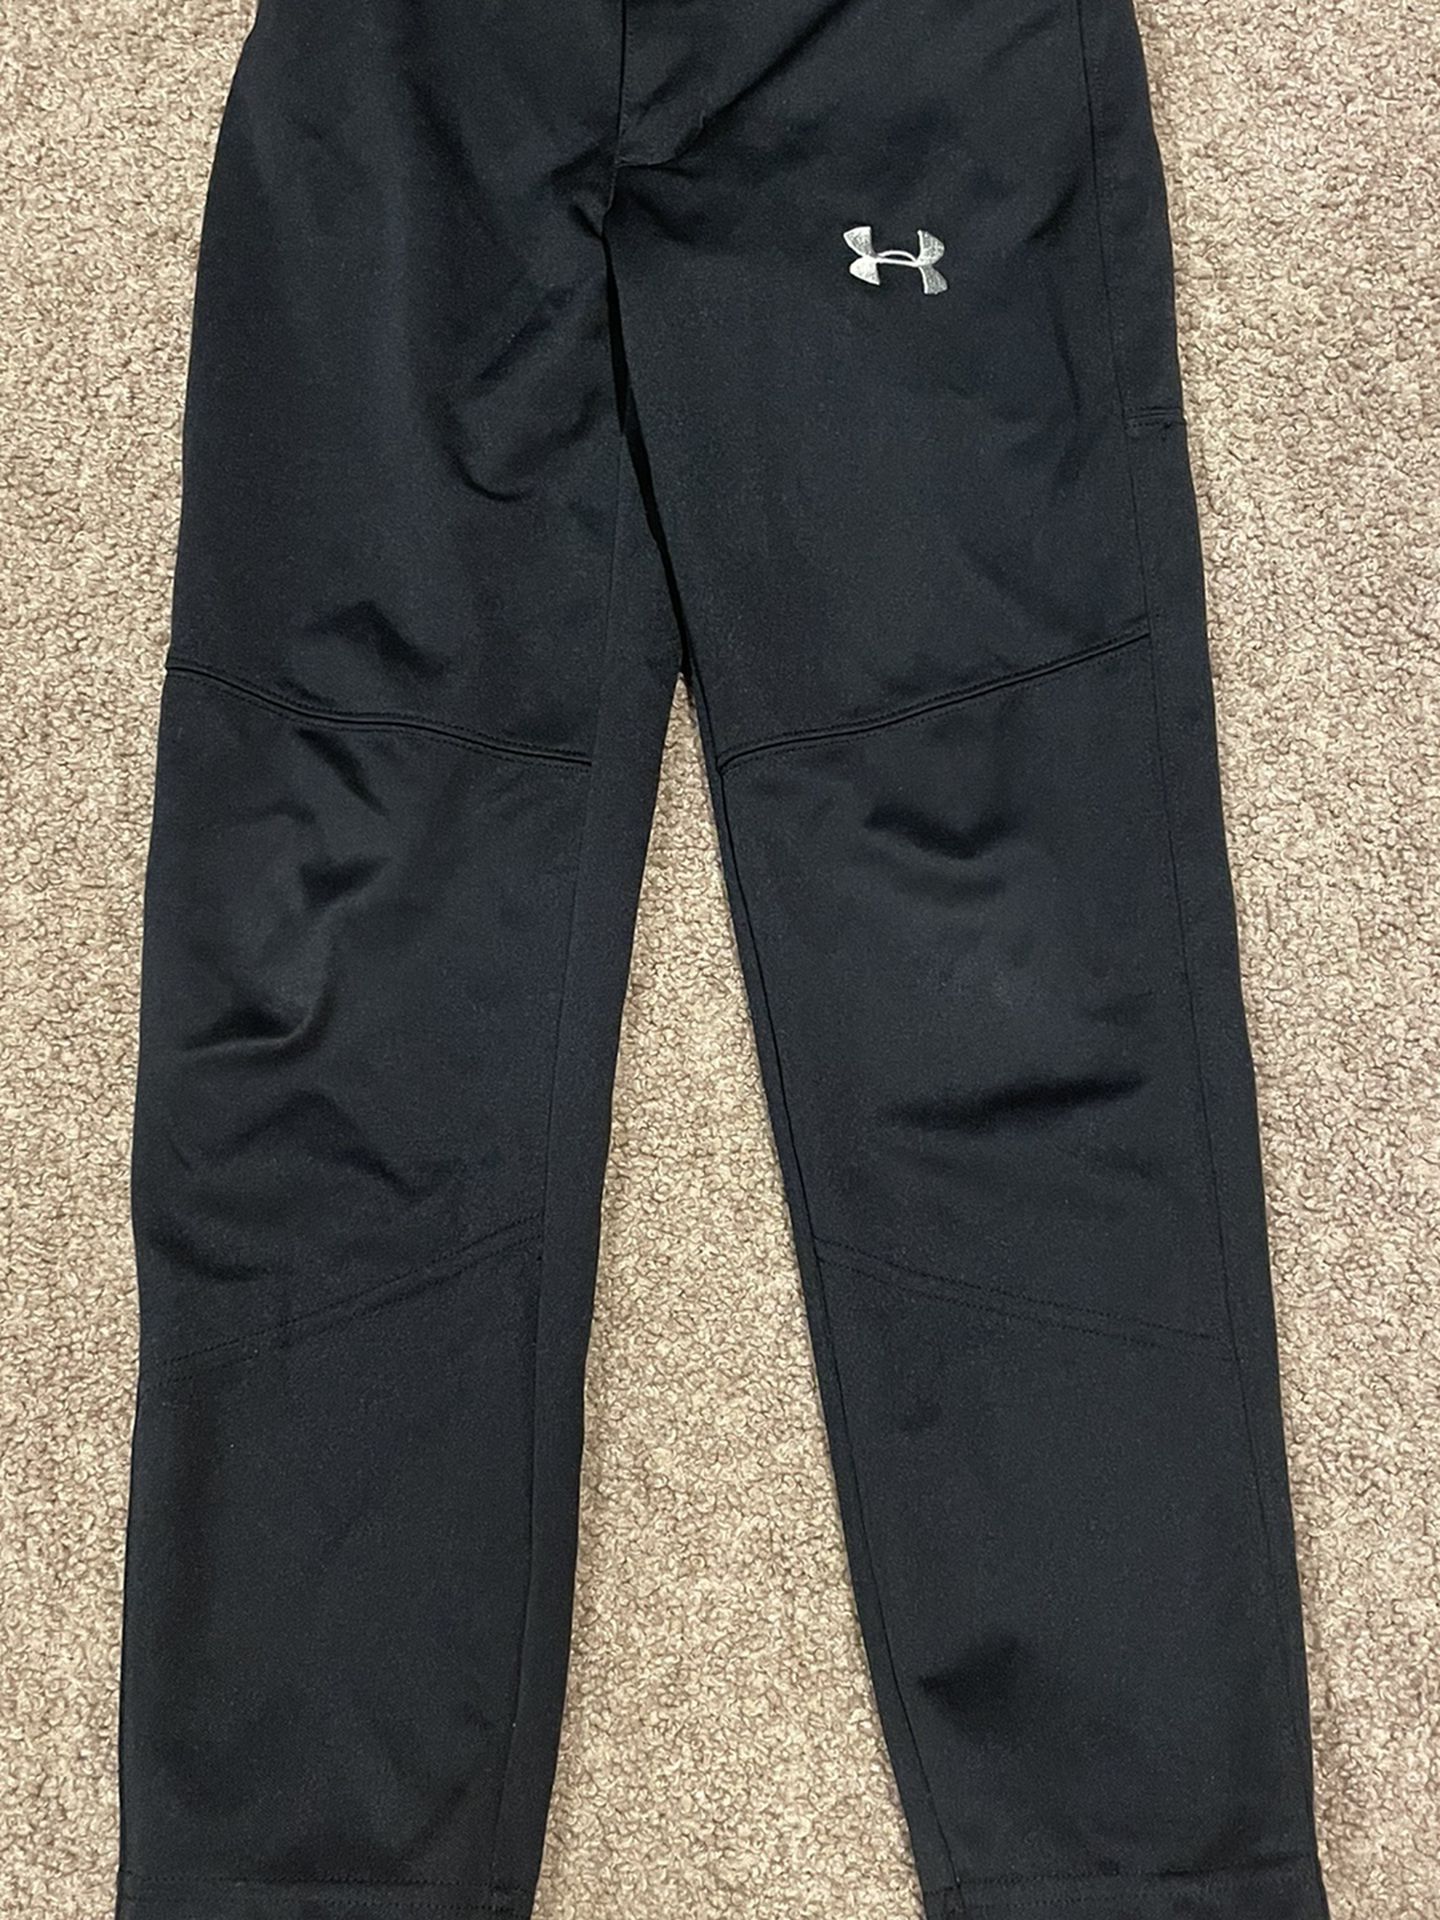 Under Armour Youth Baseball Pants Small